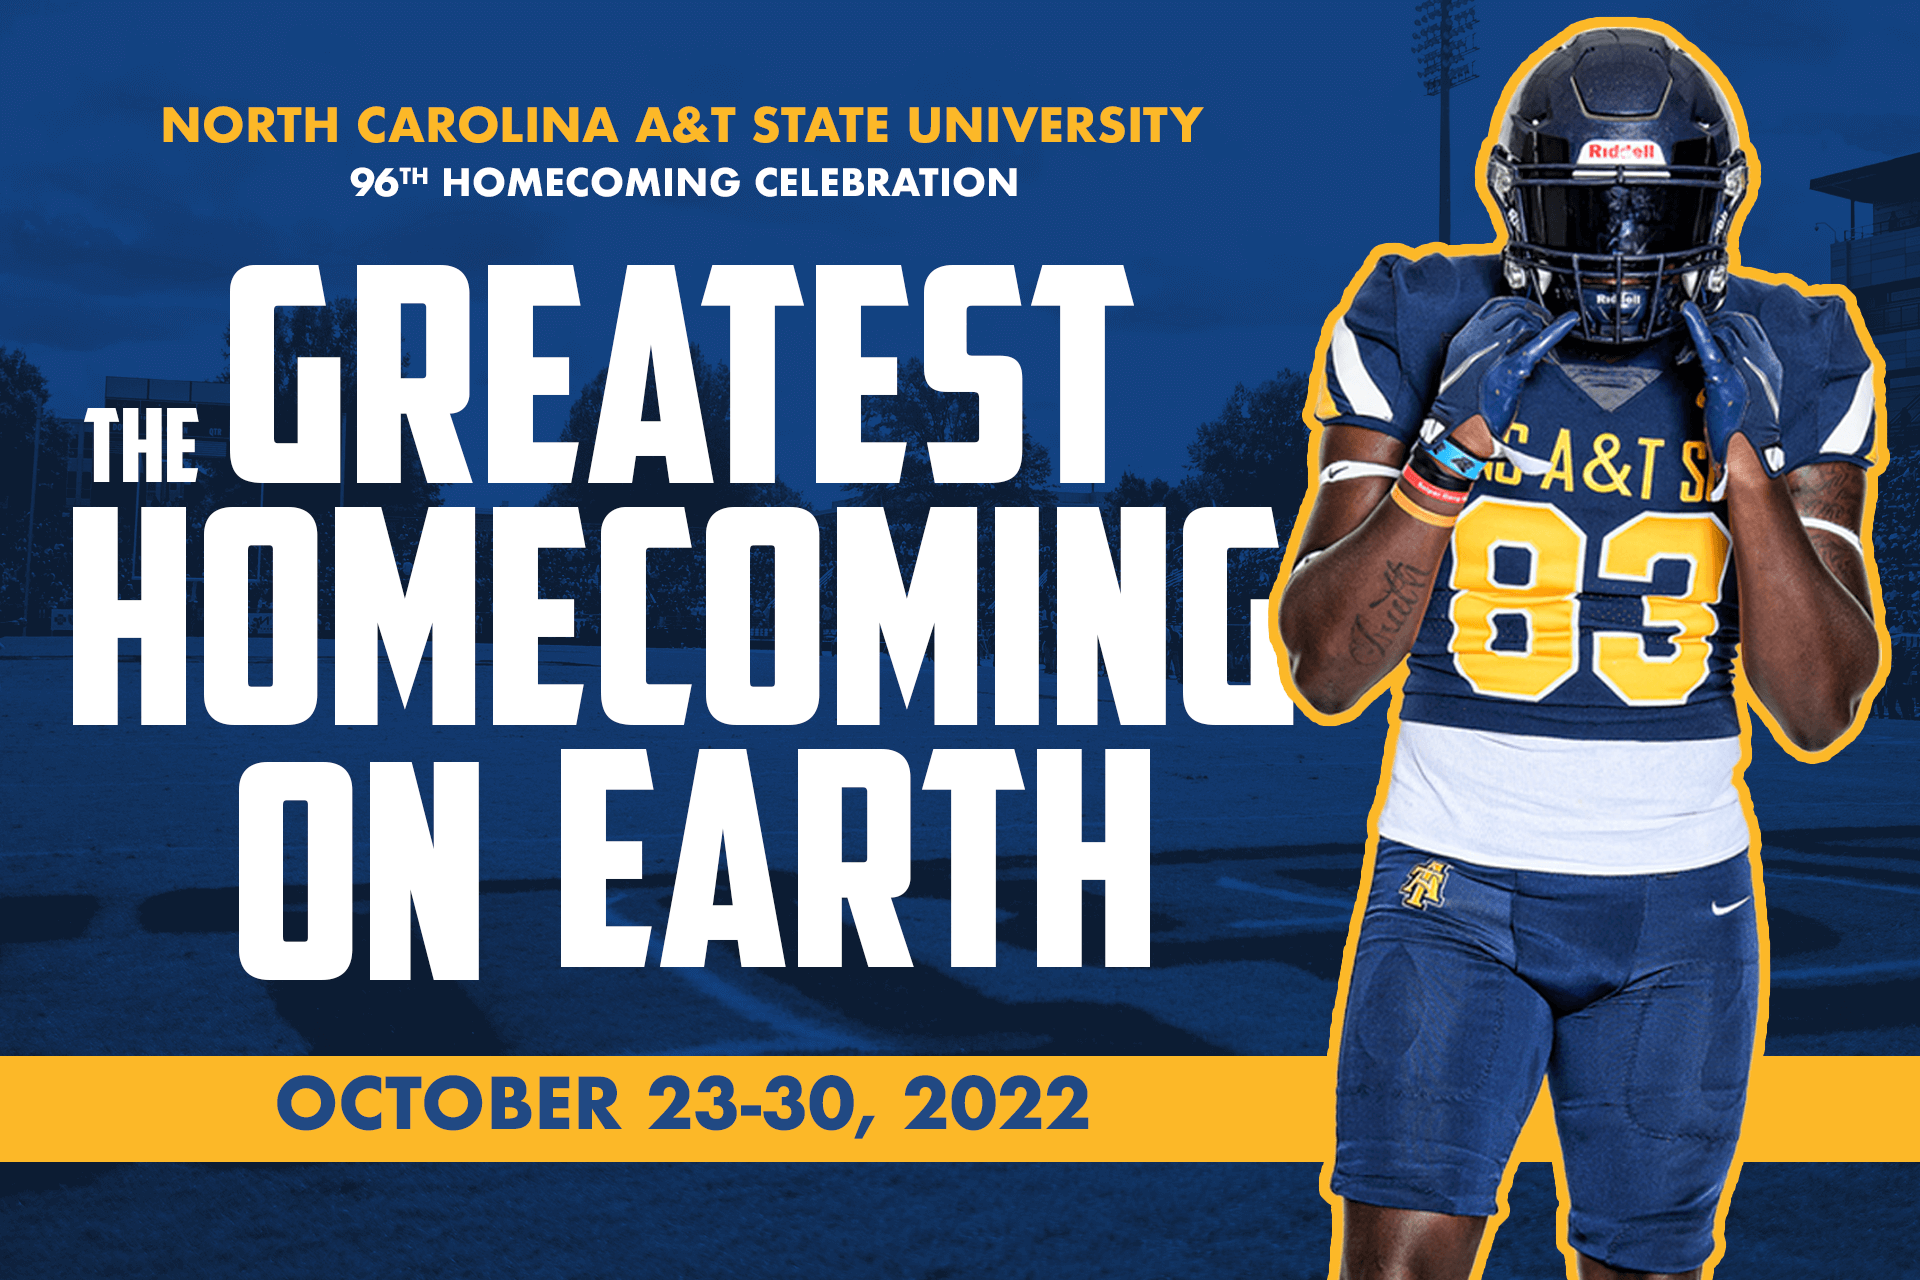 Tickets Sell Out for N.C. A&T Football Game on Oct. 29